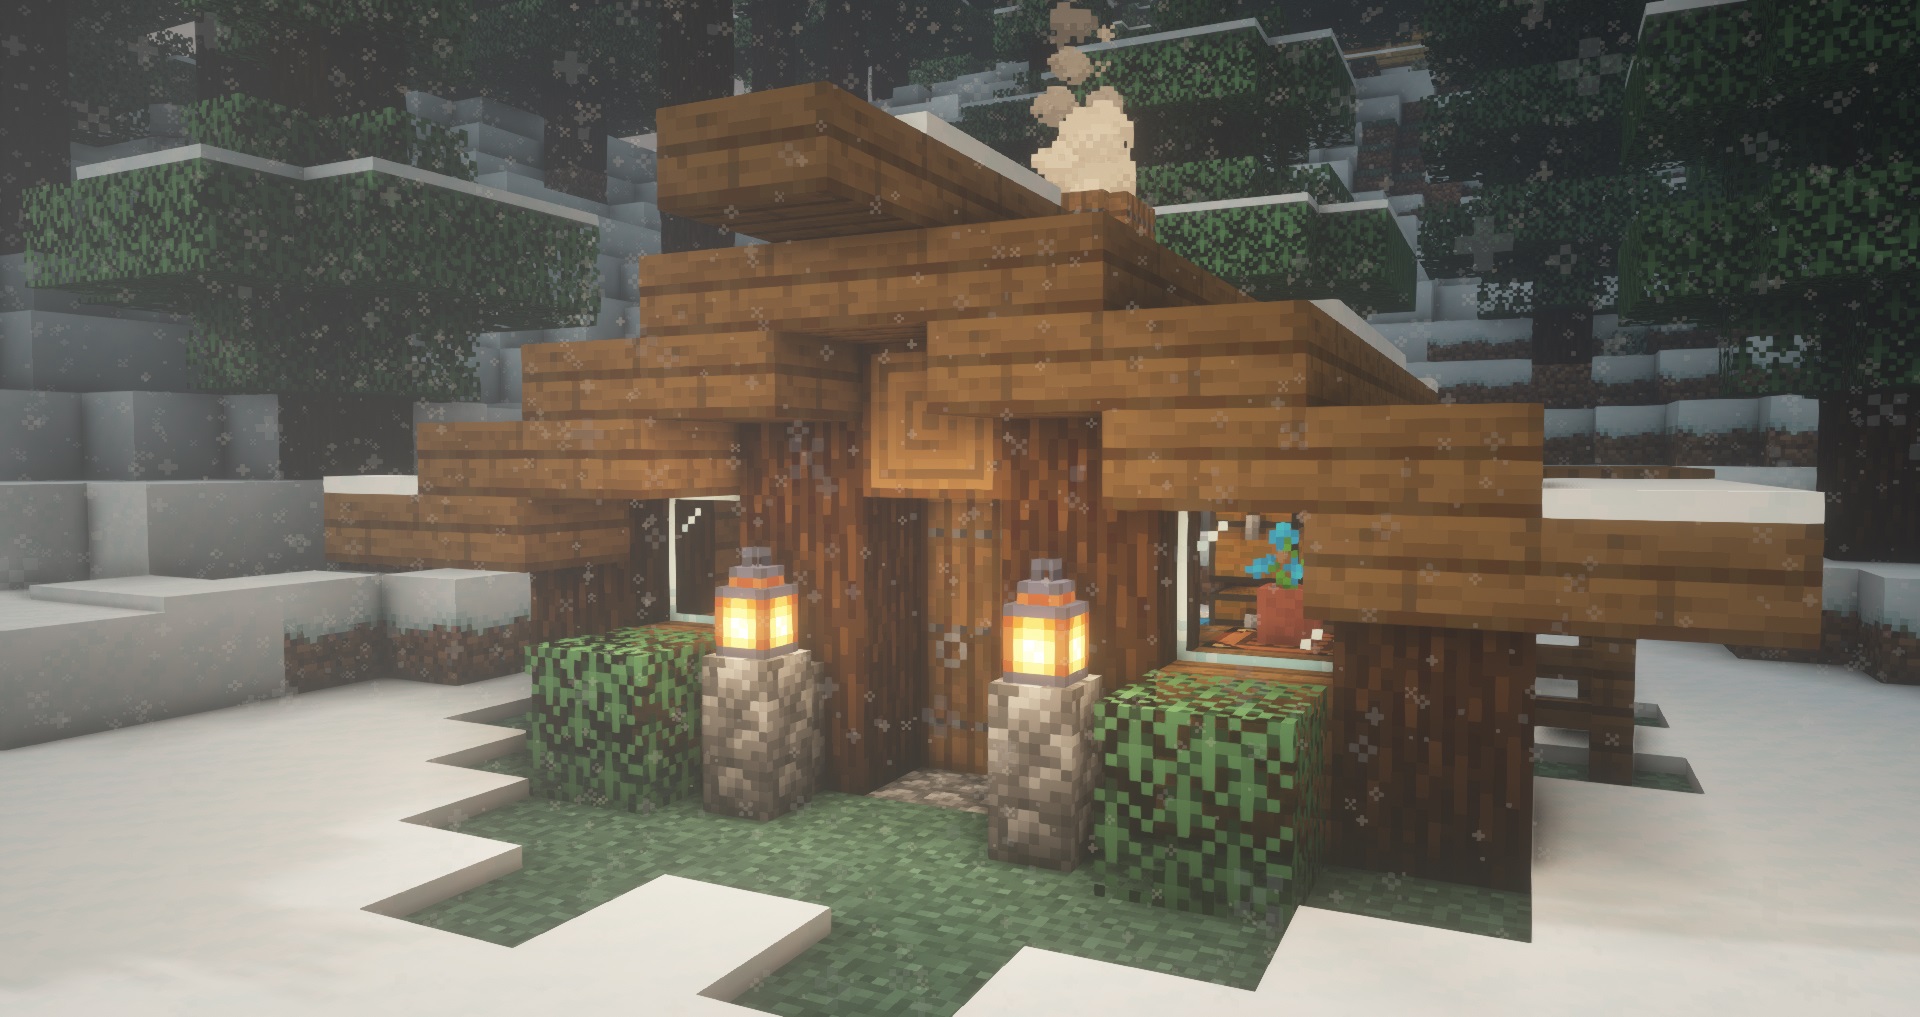 Minecraft cabin build idea - A very small spruce cabin with lanterns out front in a forest in the snow.